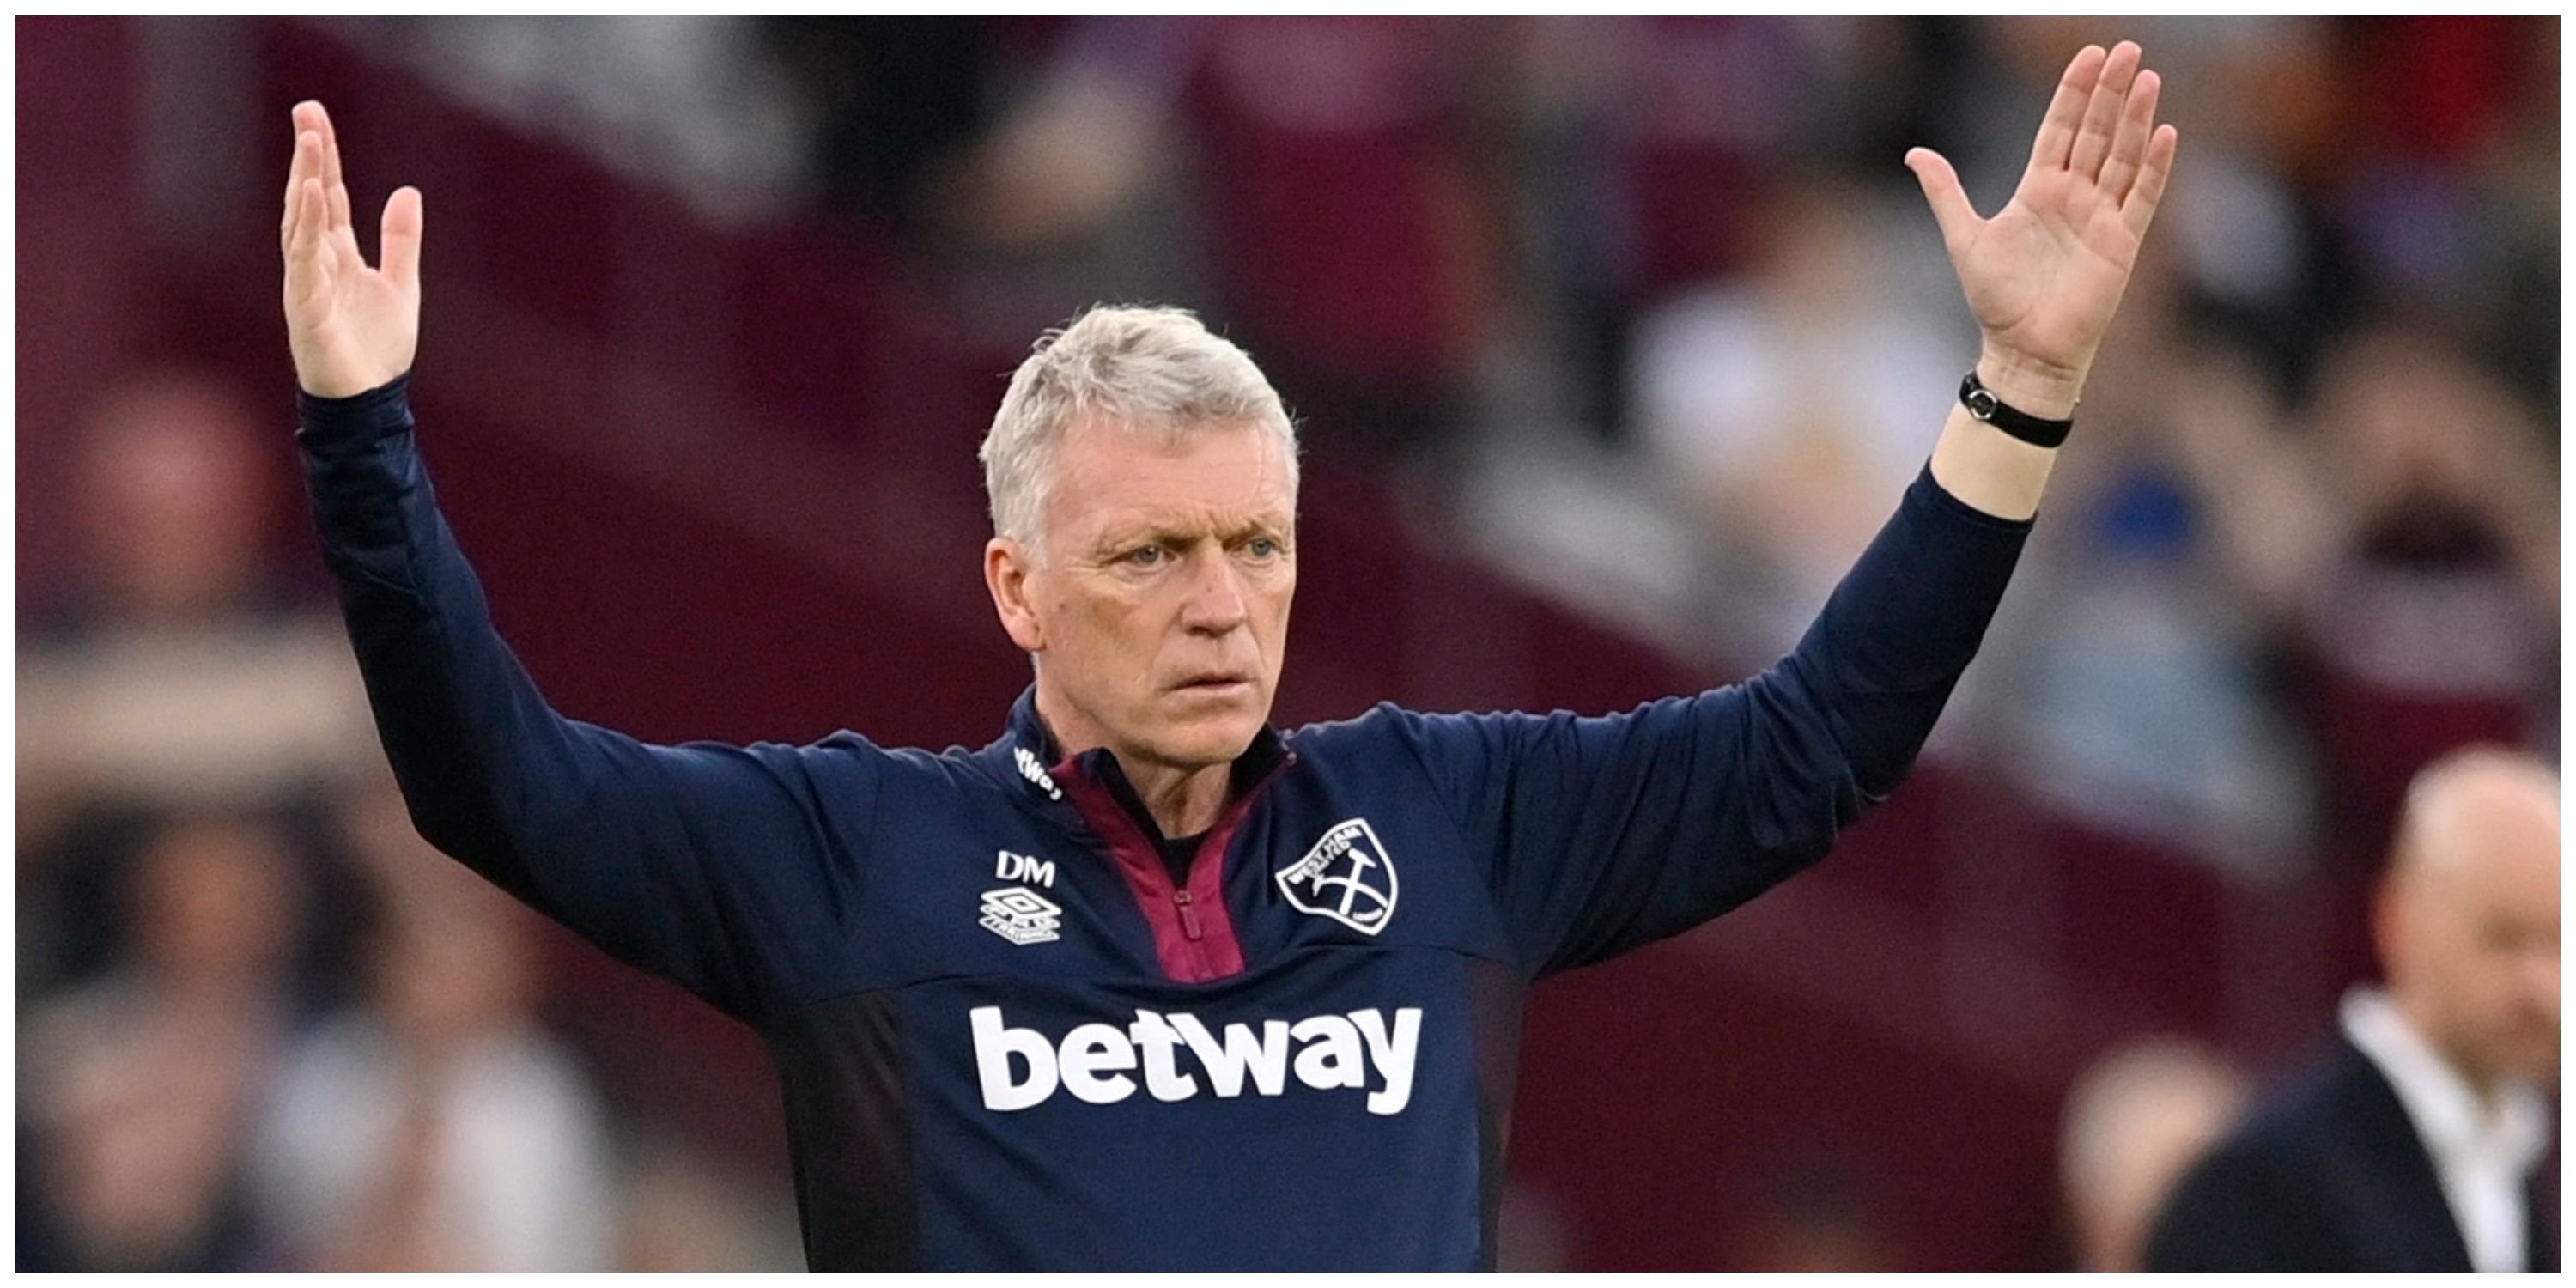 West Ham manager David Moyes throwing his arms up in the air